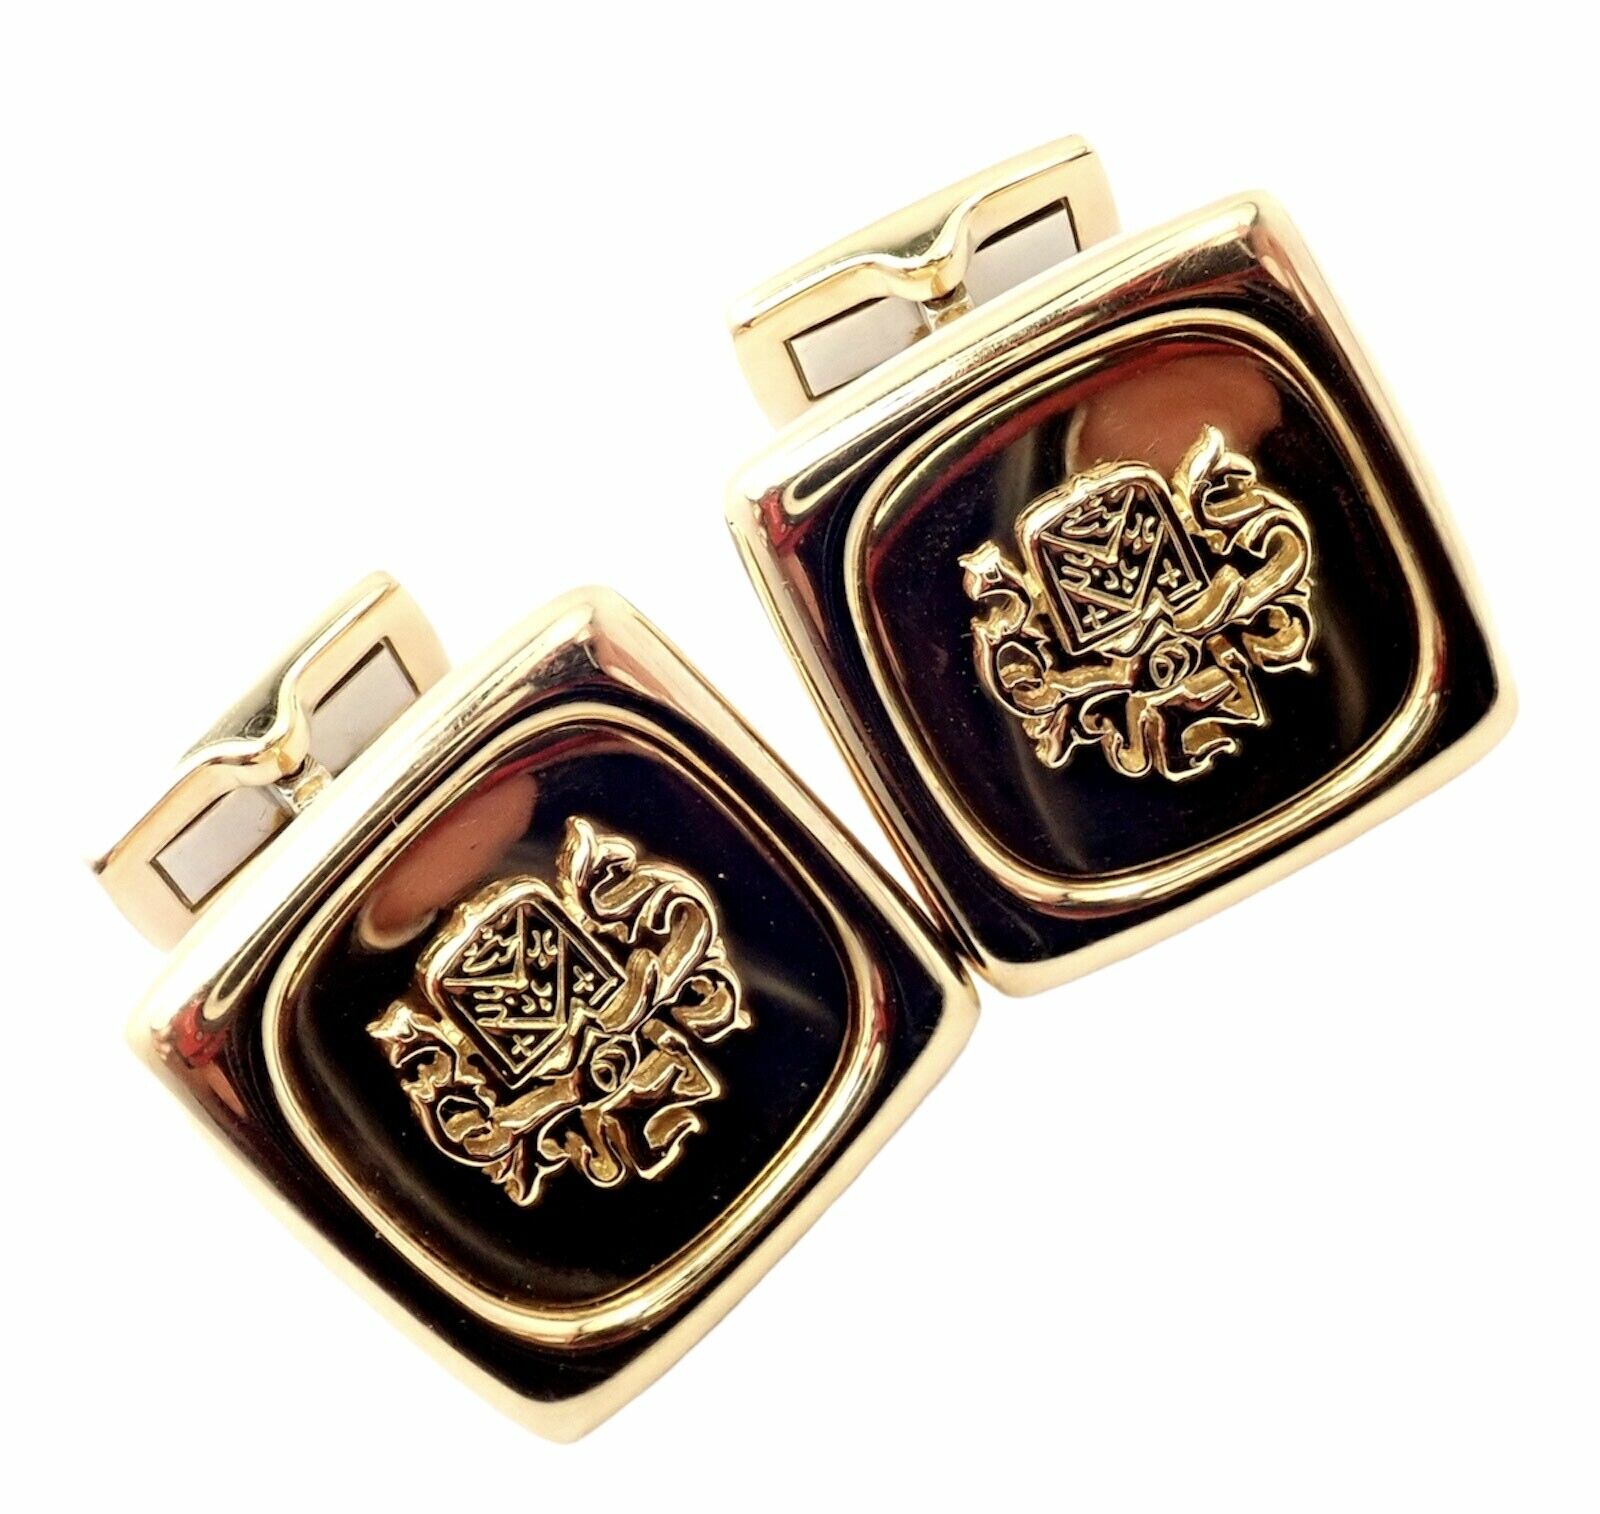 Piaget Jewelry & Watches:Men's Jewelry:Cufflinks Rare! Authentic Piaget 18k Yellow Gold Coat Of Arms Cufflinks